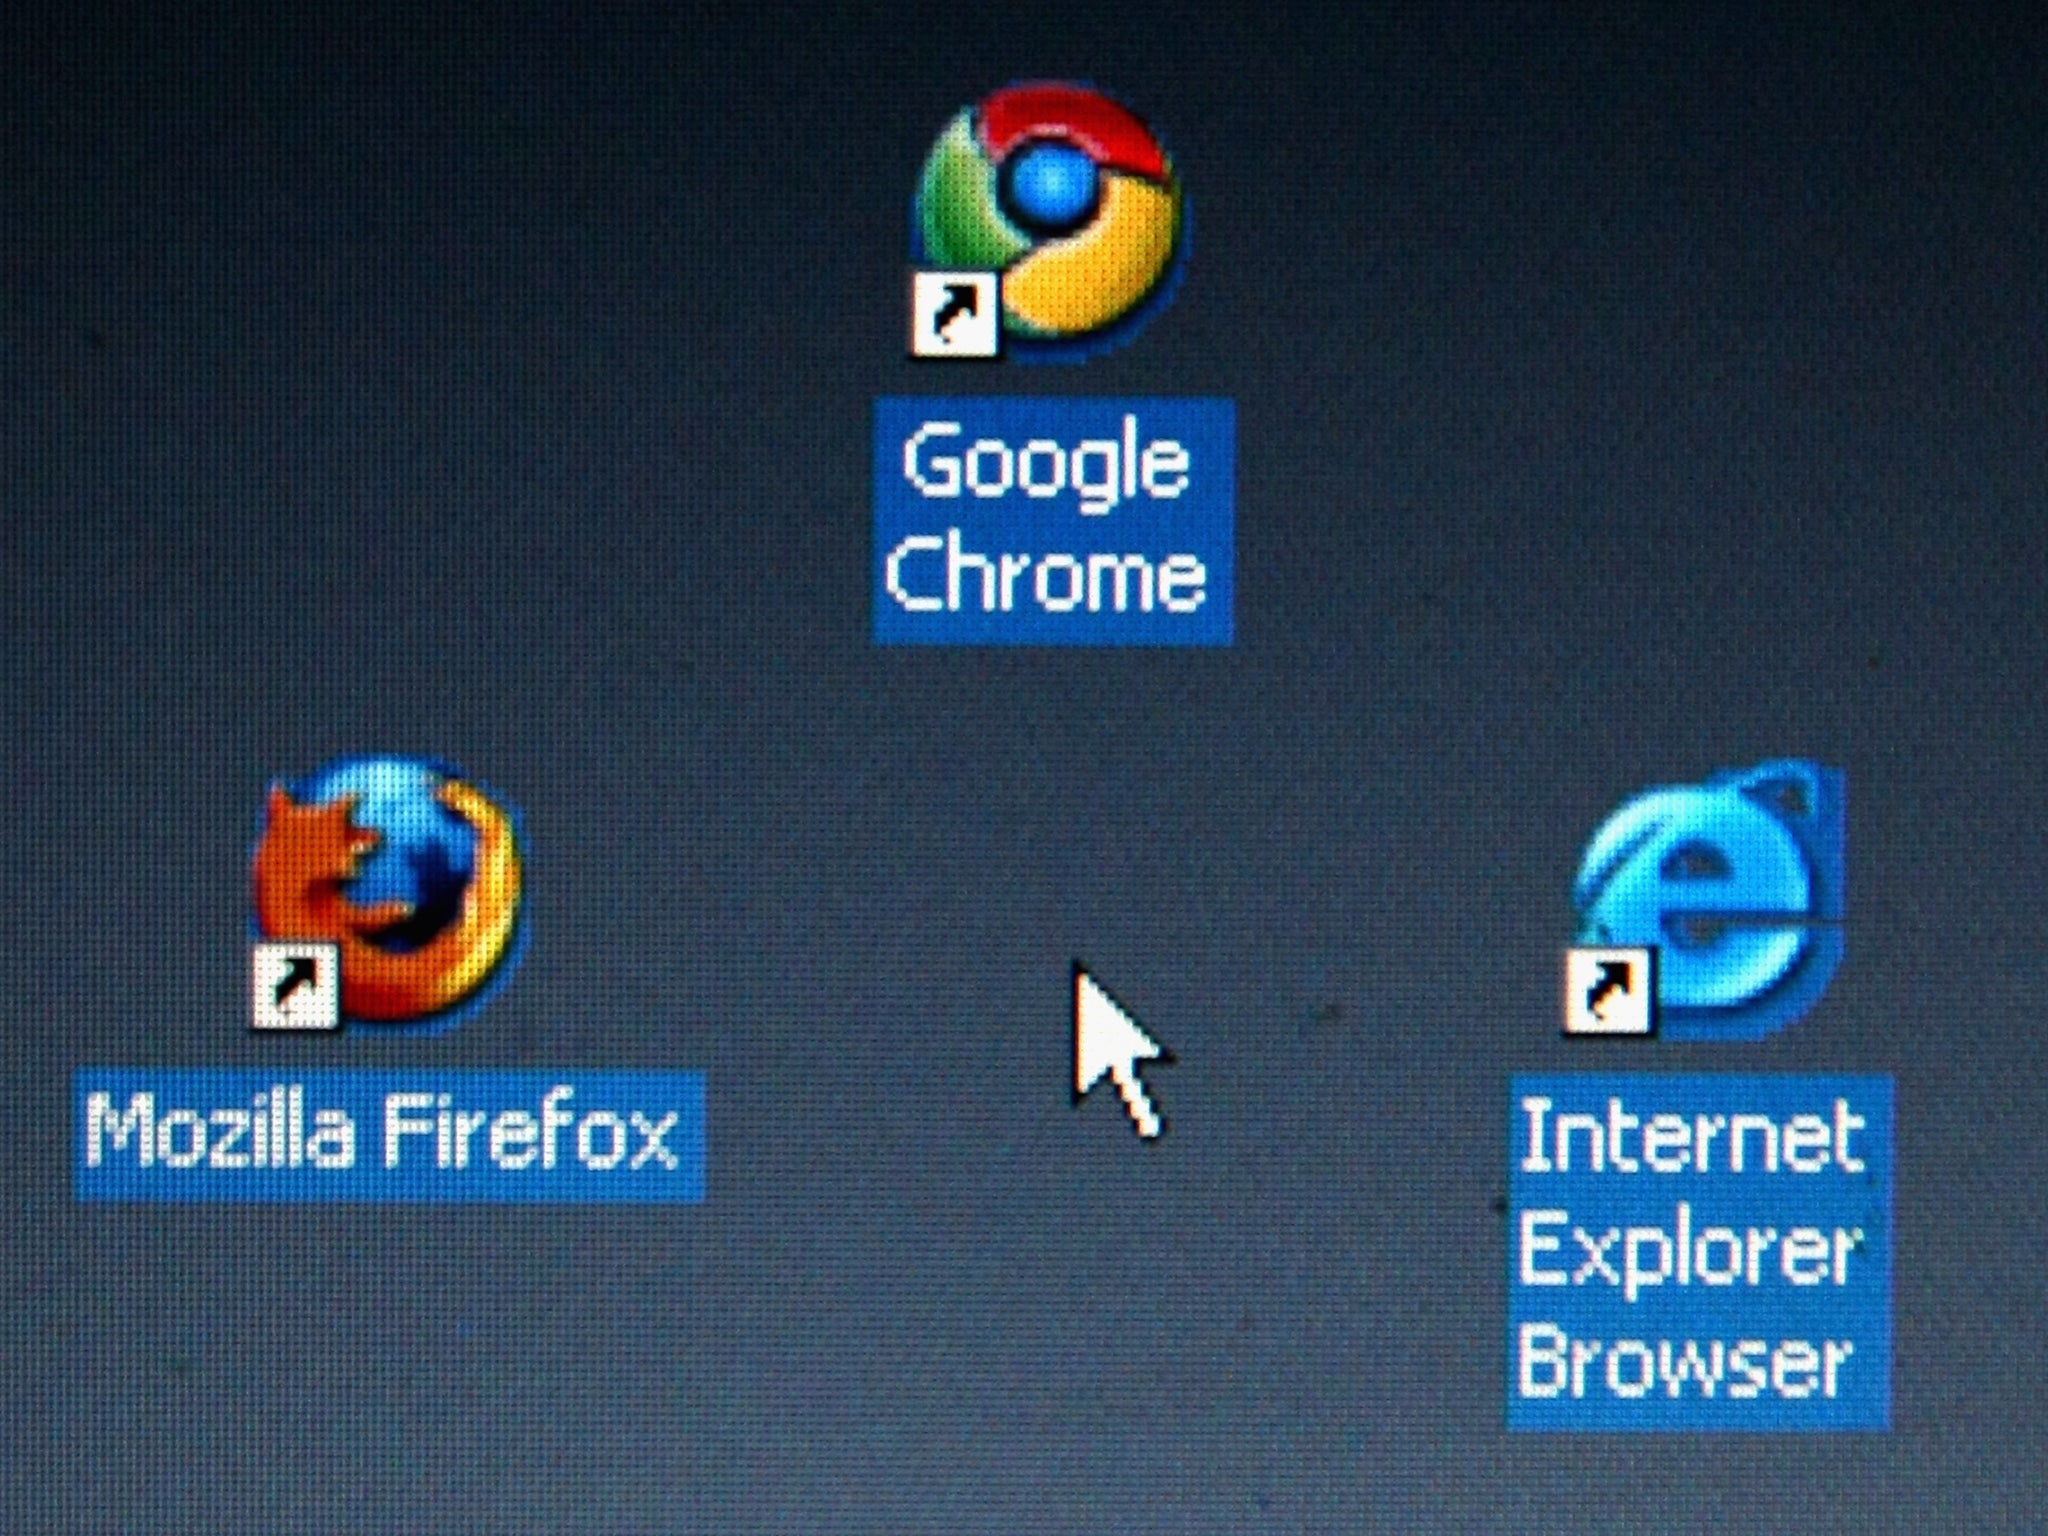 Google's Chrome browser shortcutis displayed next to Mozilla Firefox shortcut and Microsoft's Internet Explorer browser shortcut, on a laptop